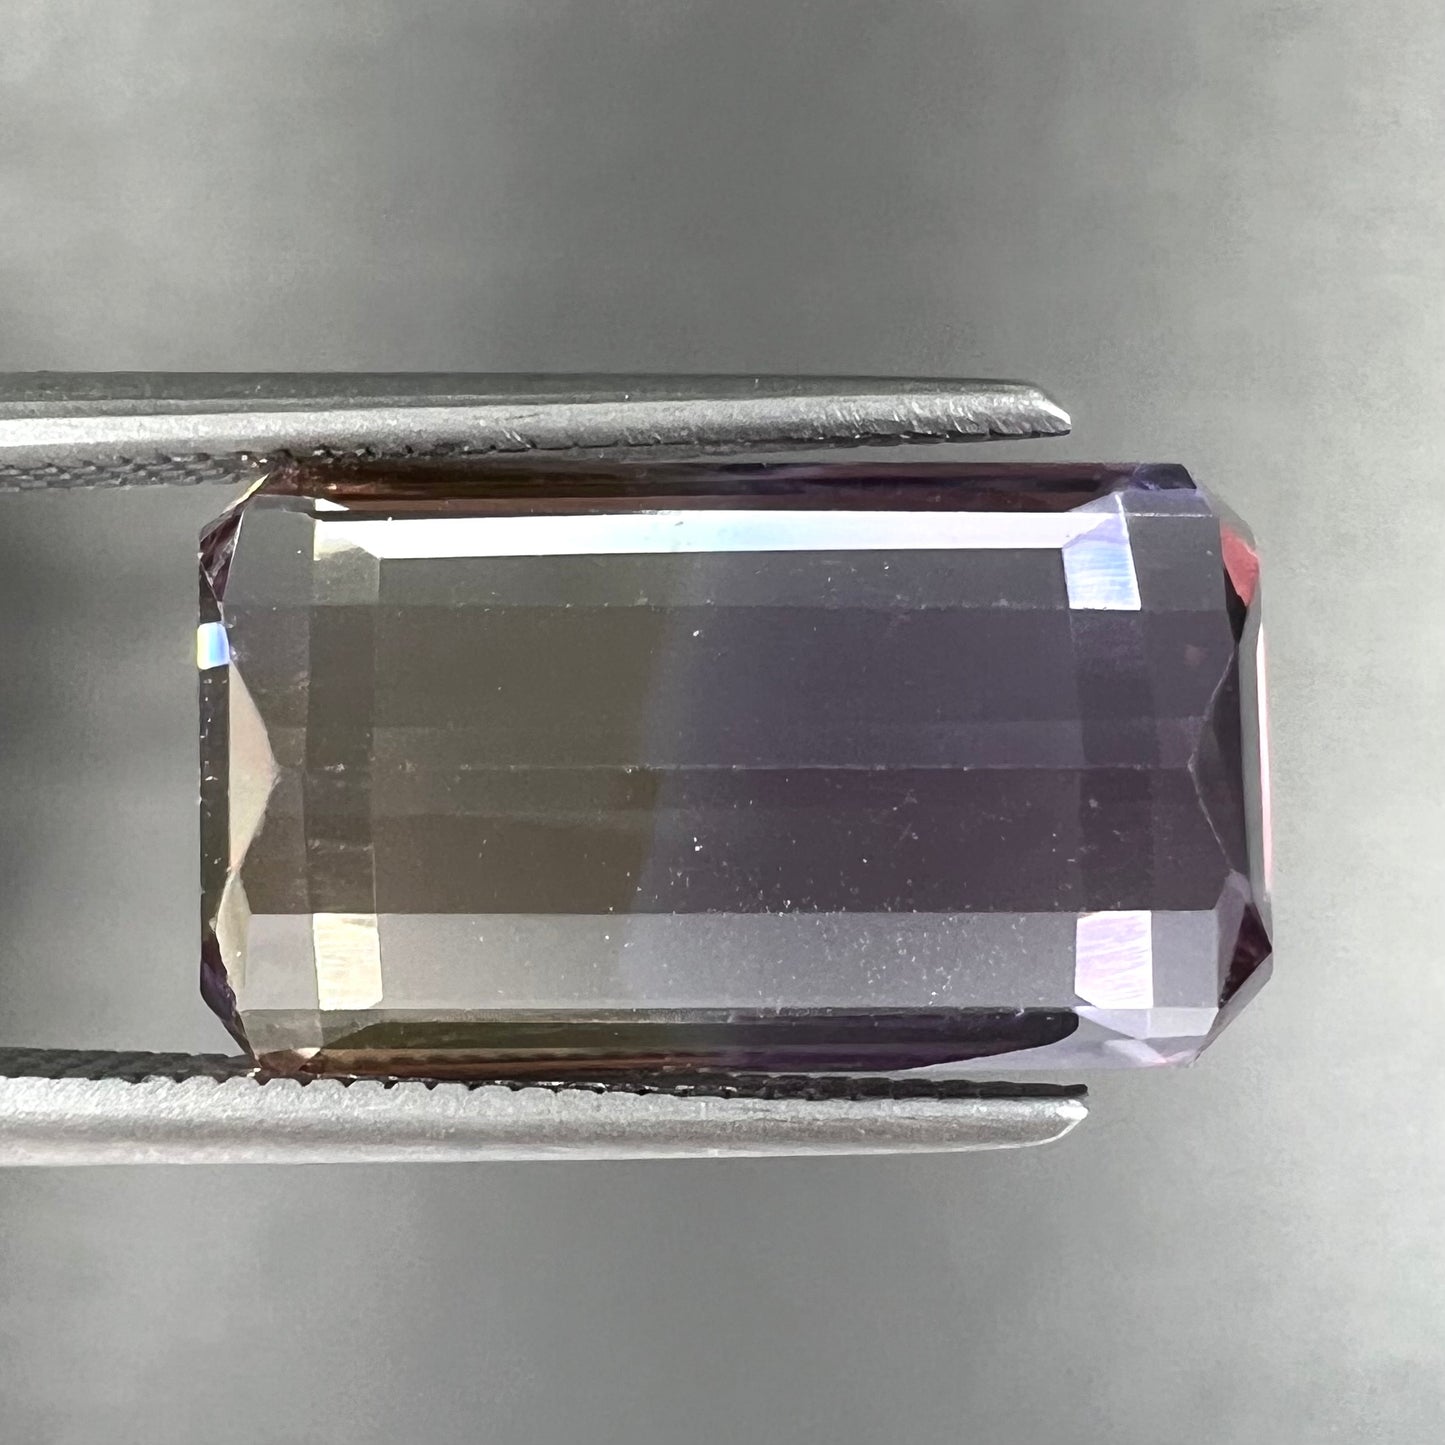 A loose, emerald cut ametrine stone.  The color fades from light purple to light yellow.